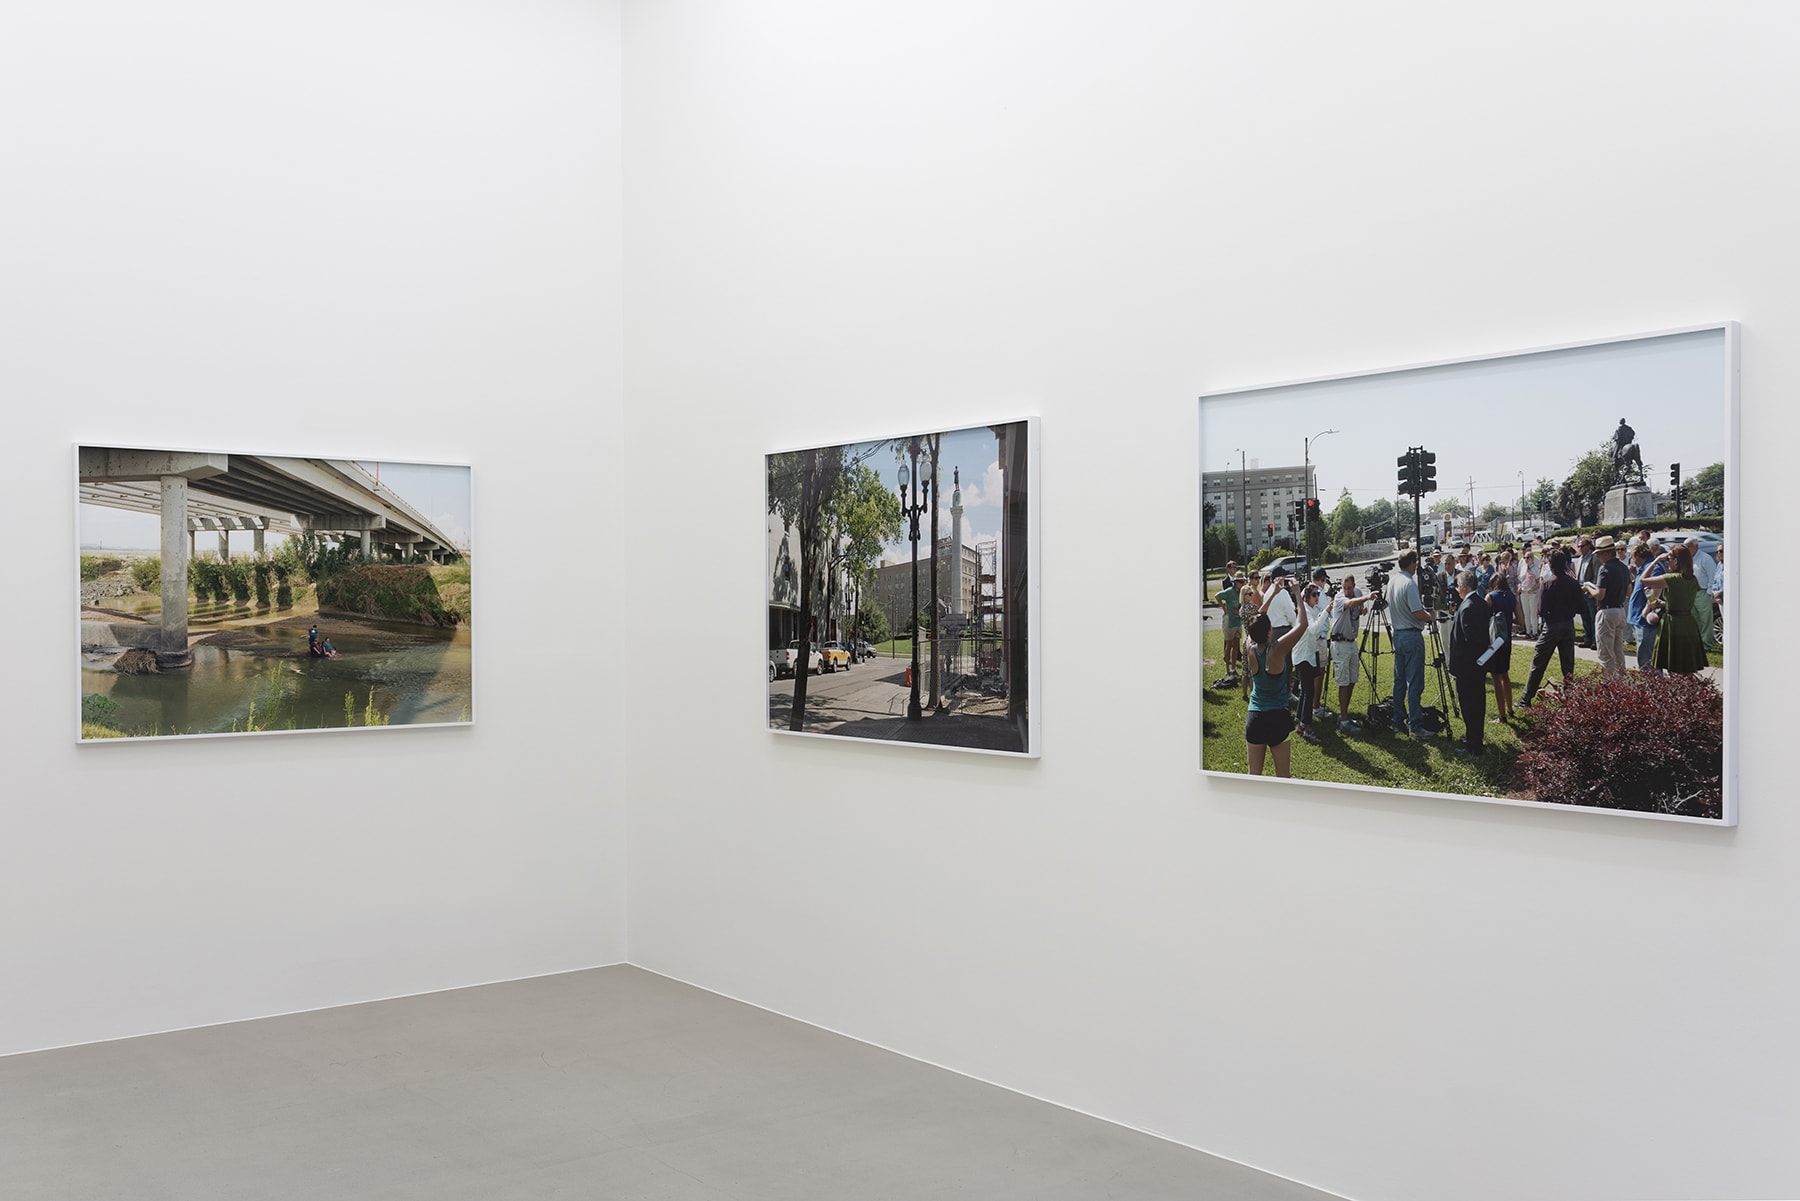 installation view of photographs by An-My Le